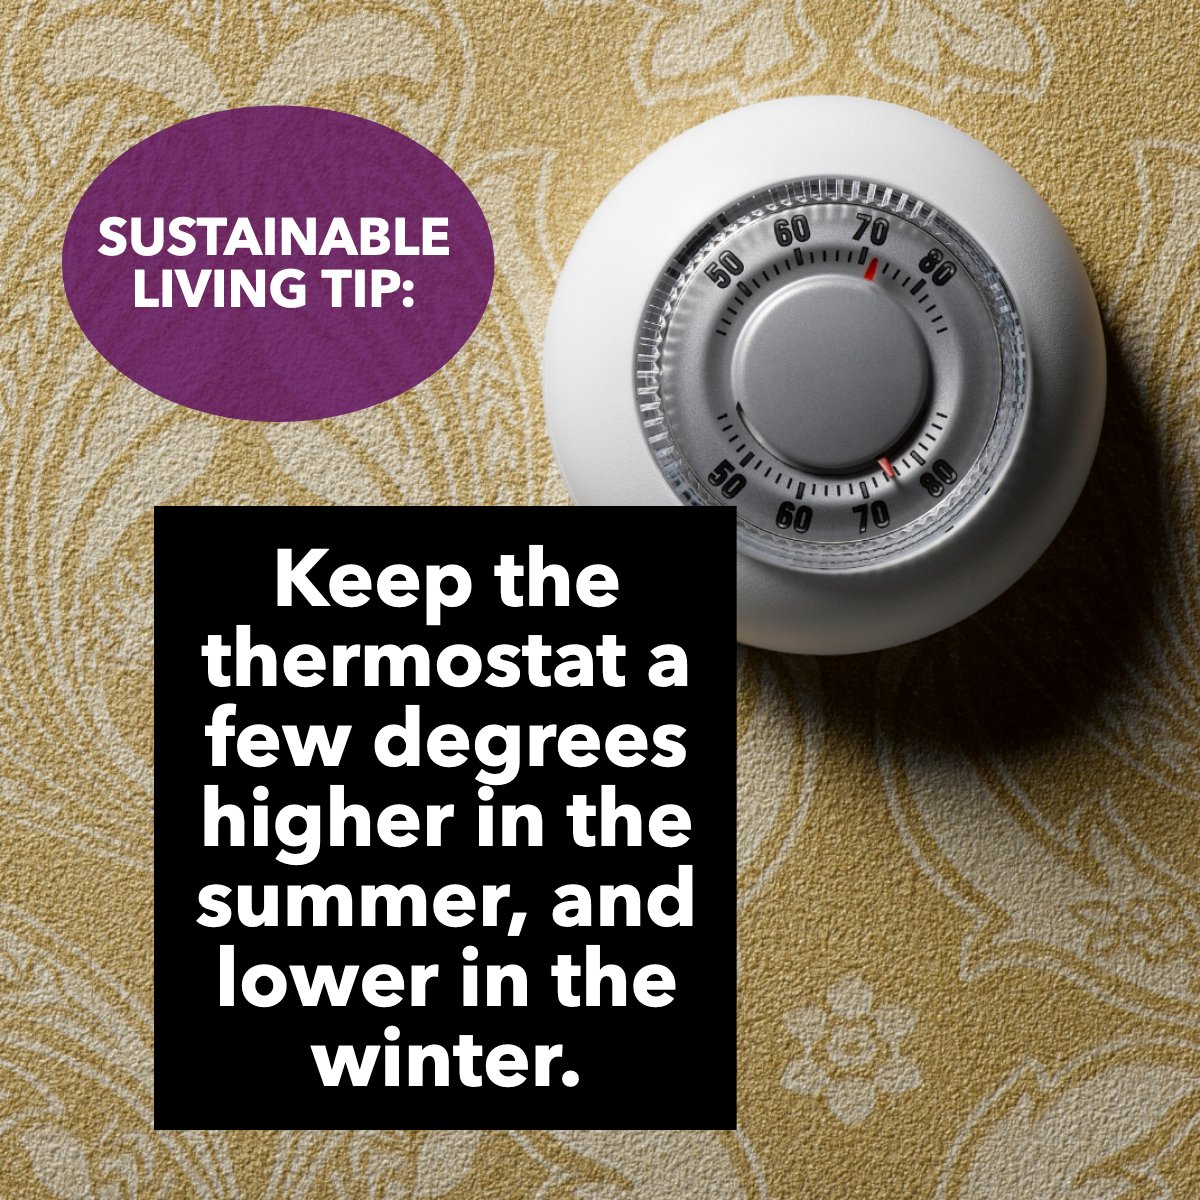 Here is a useful tip! 

Let's try it this and every season! ❄️

#sustainablelifestyle #sustainable #sustainablity #thermostat
 #teammontalvo #home #foresalebyowner #porterranch #bestclients #remax #northridge #westhills #woodlandhills #homeseller #realestateagent